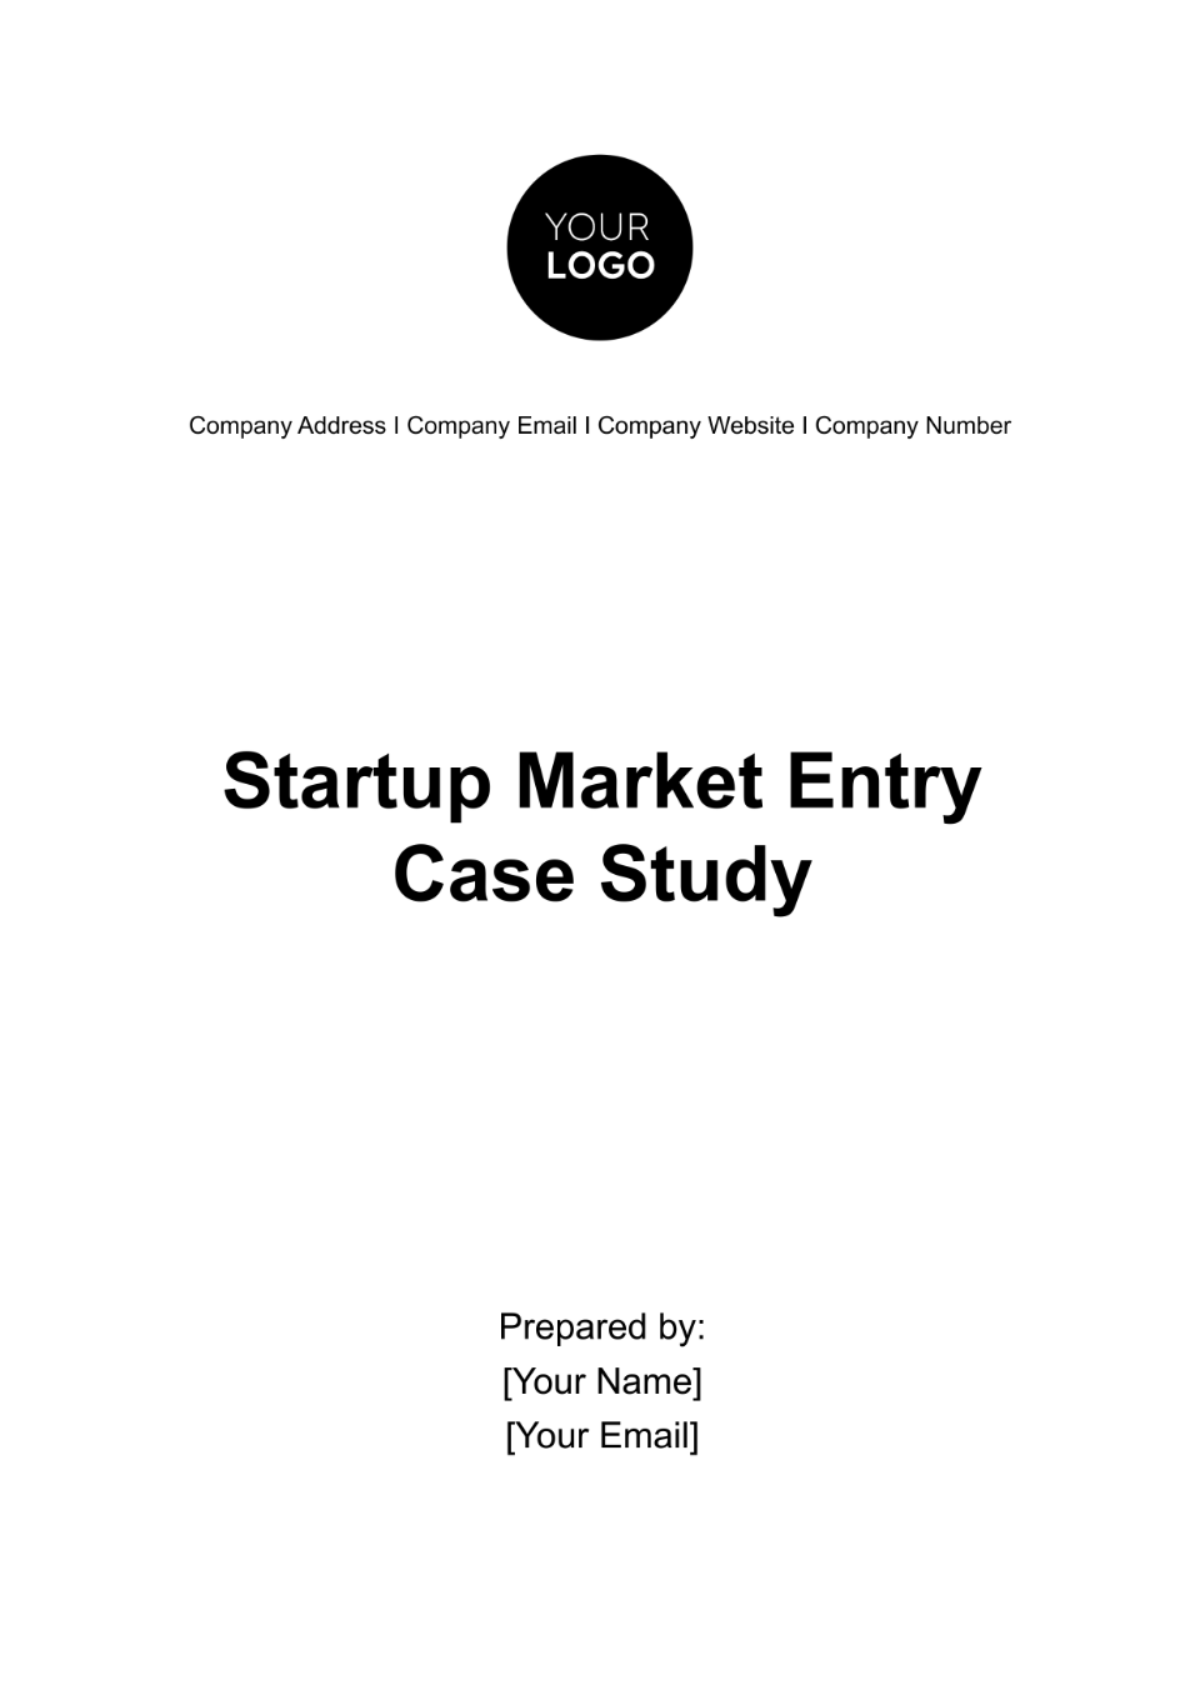 Startup Market Entry Case Study Template